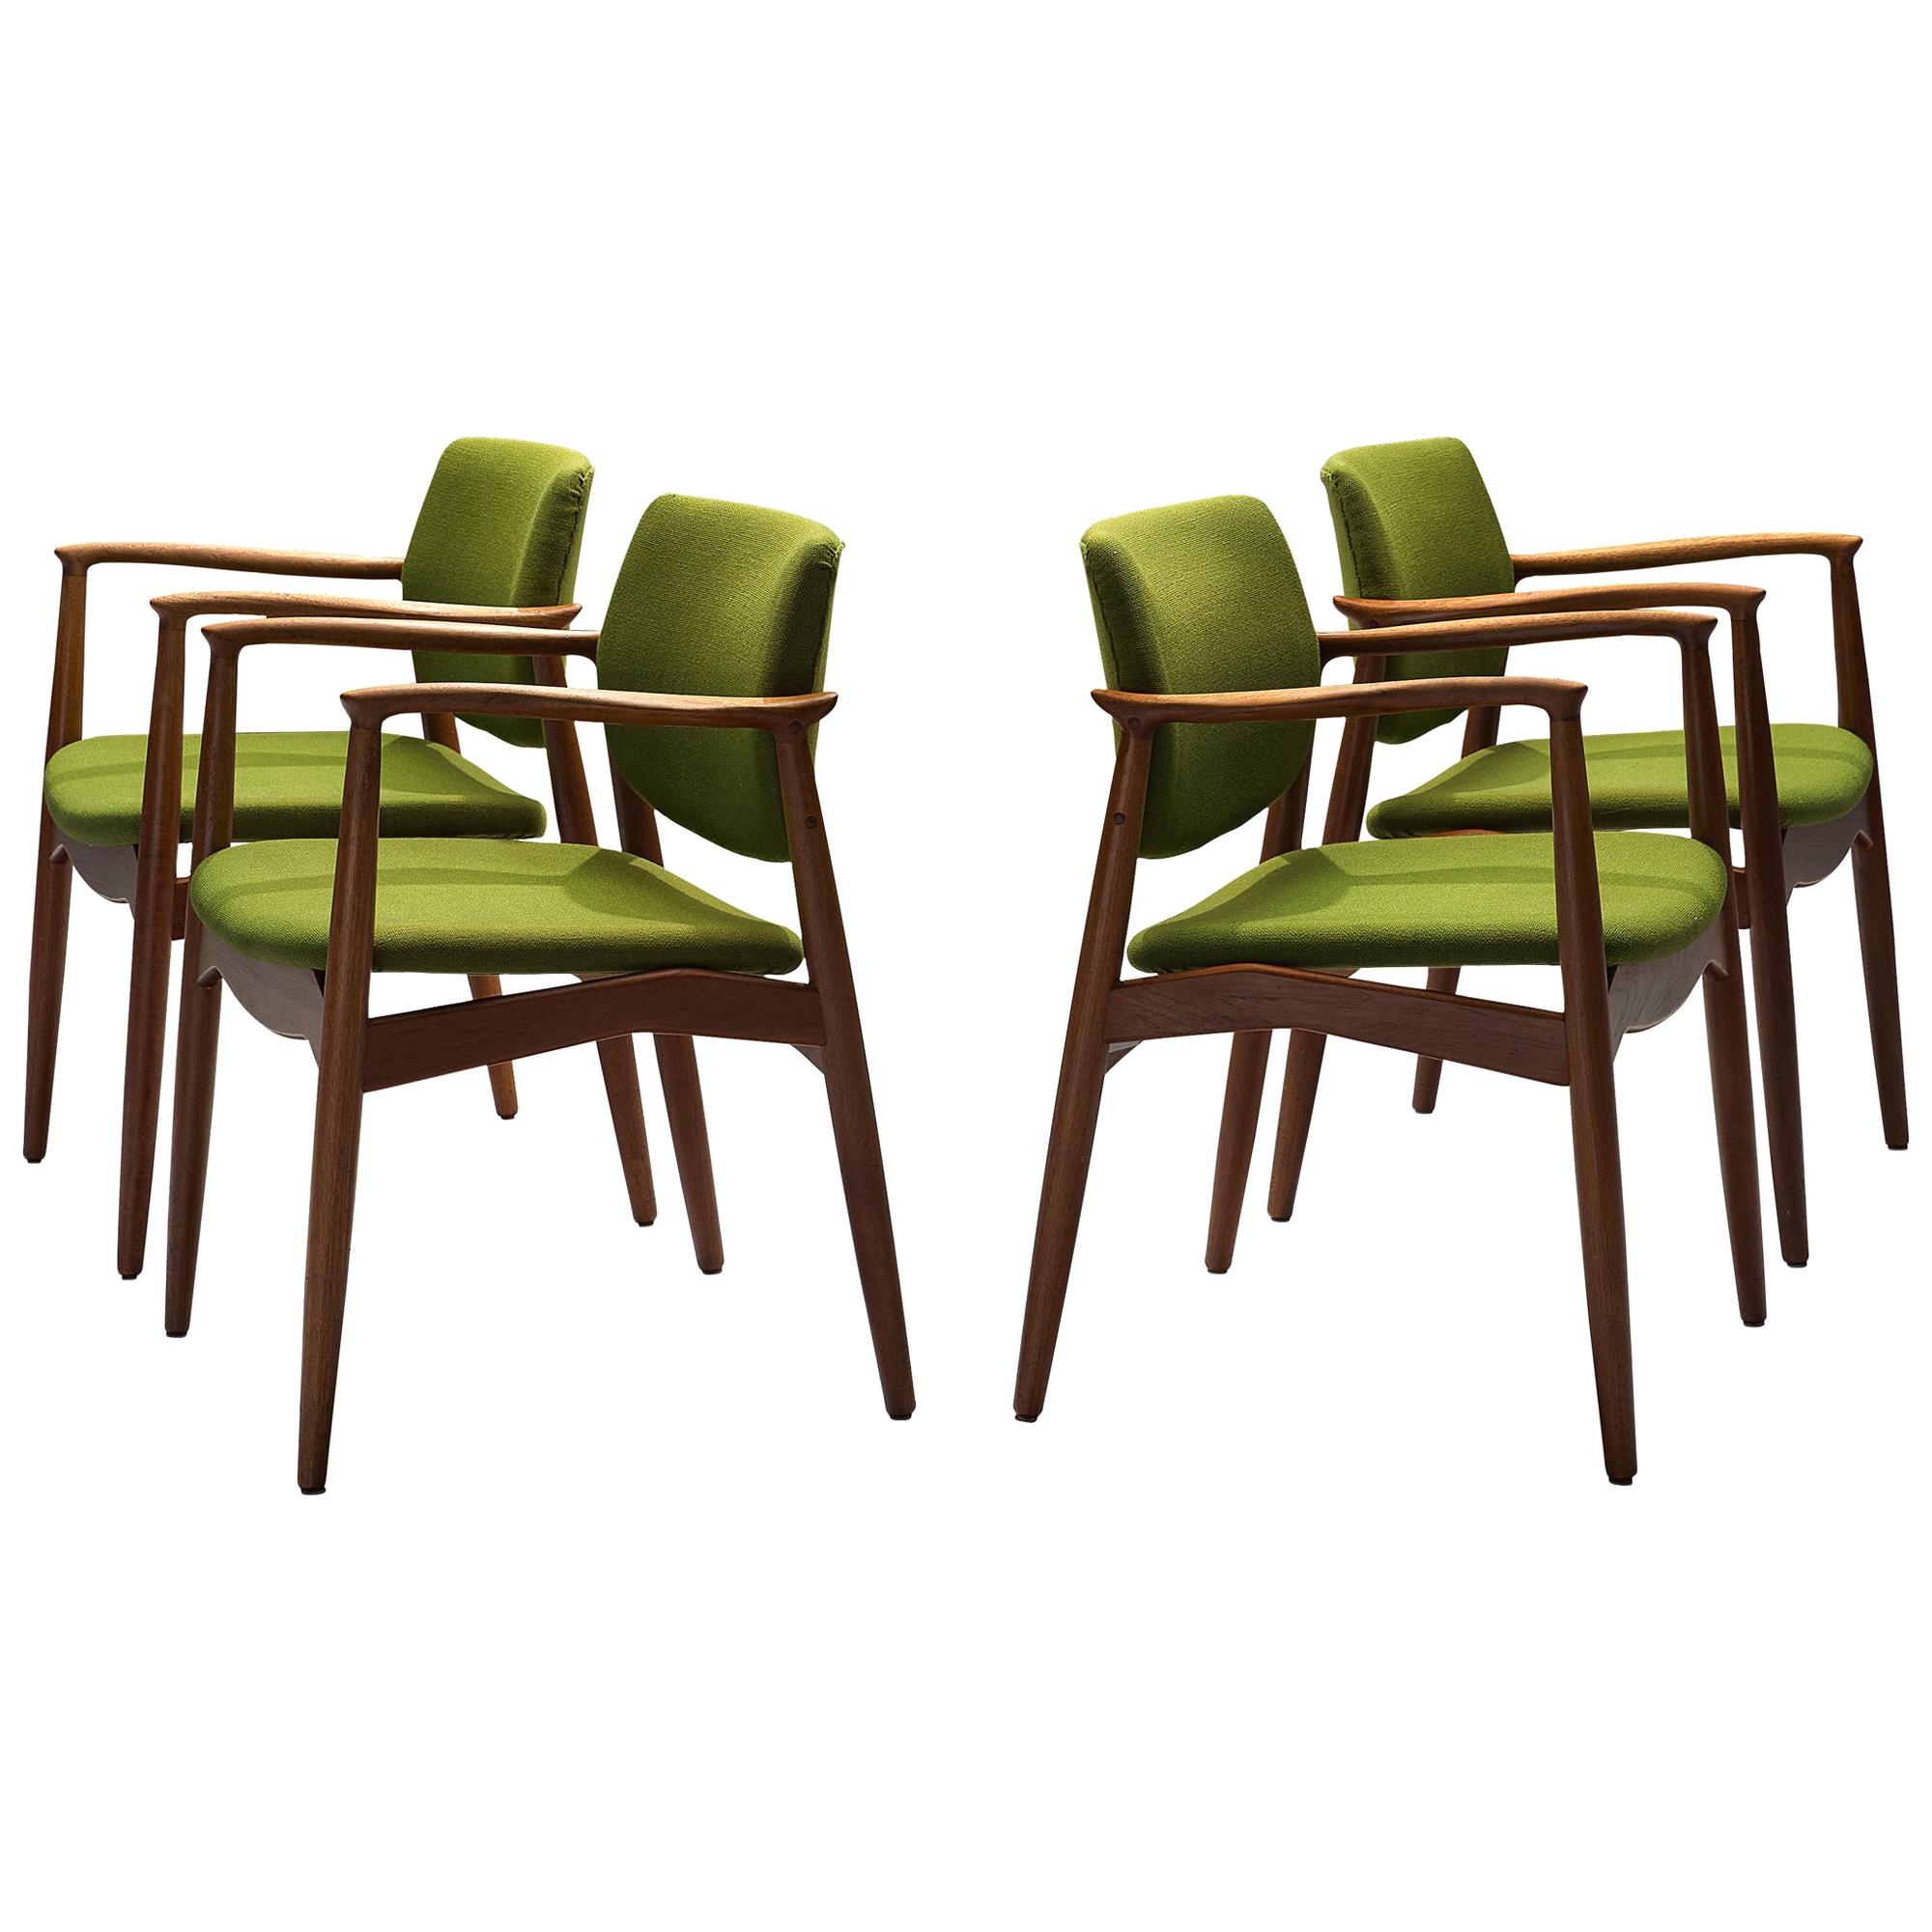 Eric Buch for Ørum Møbler, set of four 'Captains' armchairs, teak, green fabric upholstery, Denmark, 1957

Set of four sculpted dining chairs in solid teak. These chairs show the characteristics of the well-known model 50 by Erik Buck. Yet this